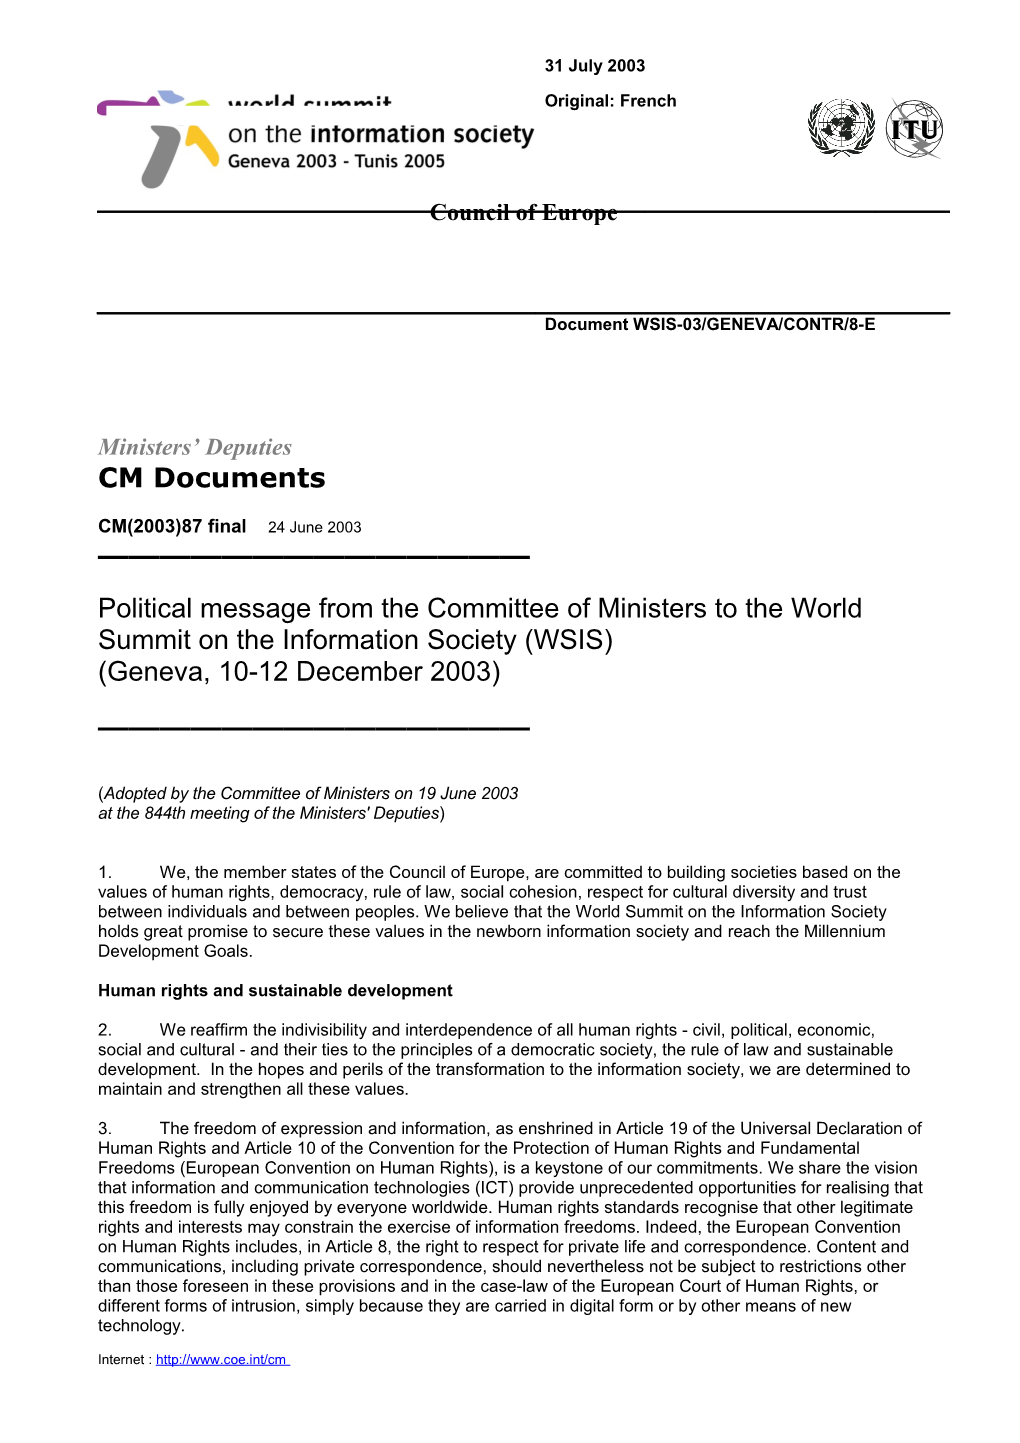 CM(2003)87 Final Political Message from the Committee of Ministers to the World Summit